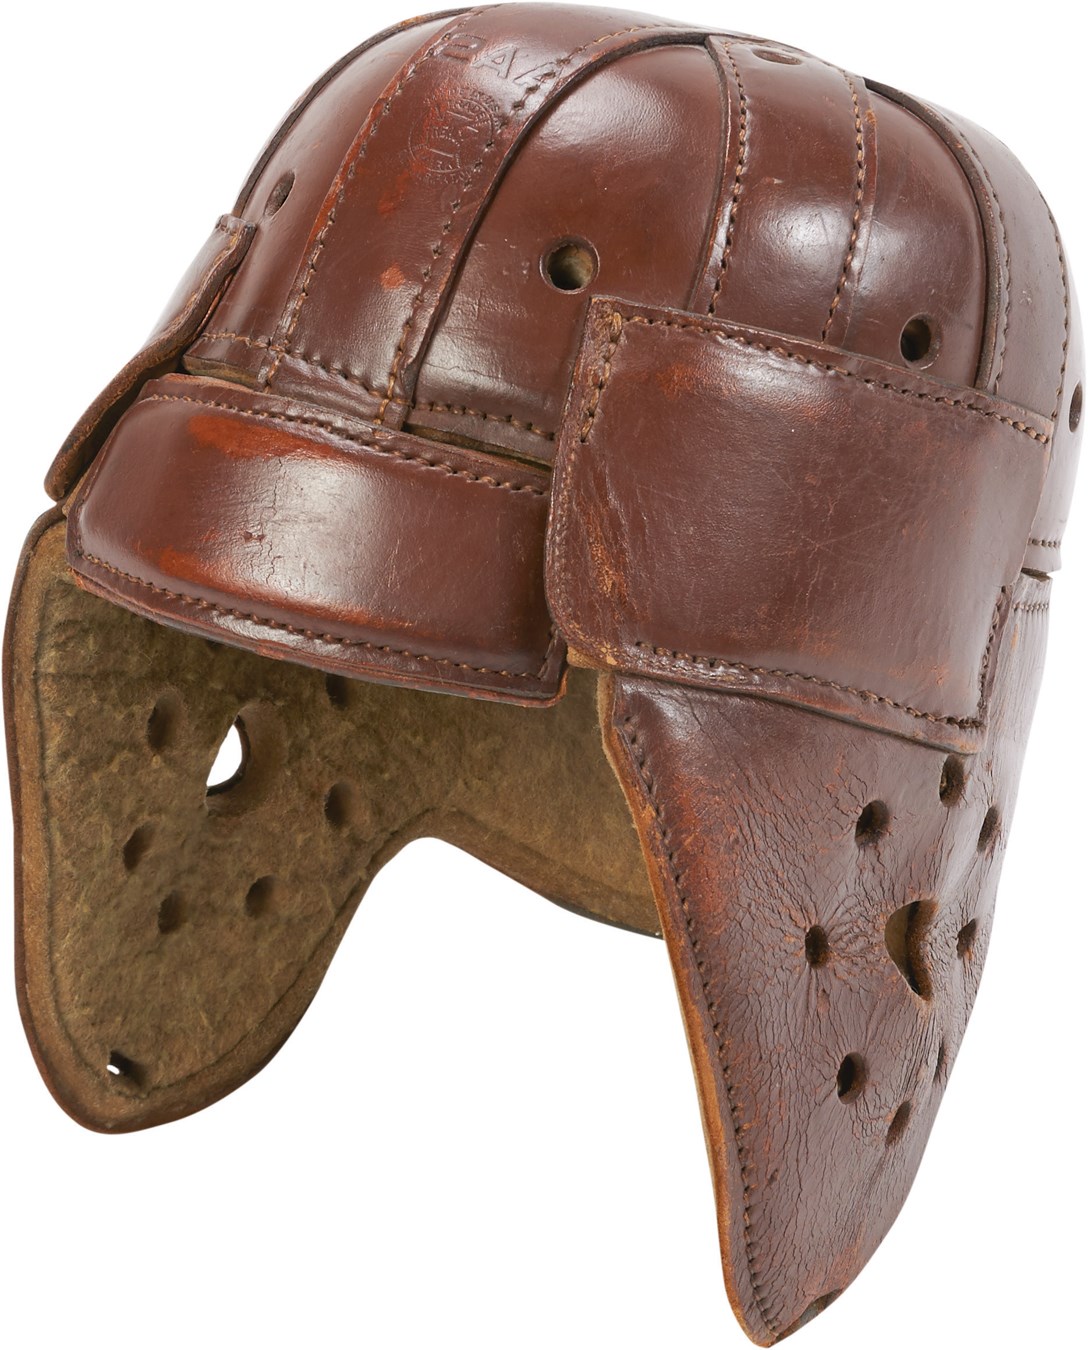 Antique Sporting Goods - 1930s Reach Football Helmet with Added Temple Protection